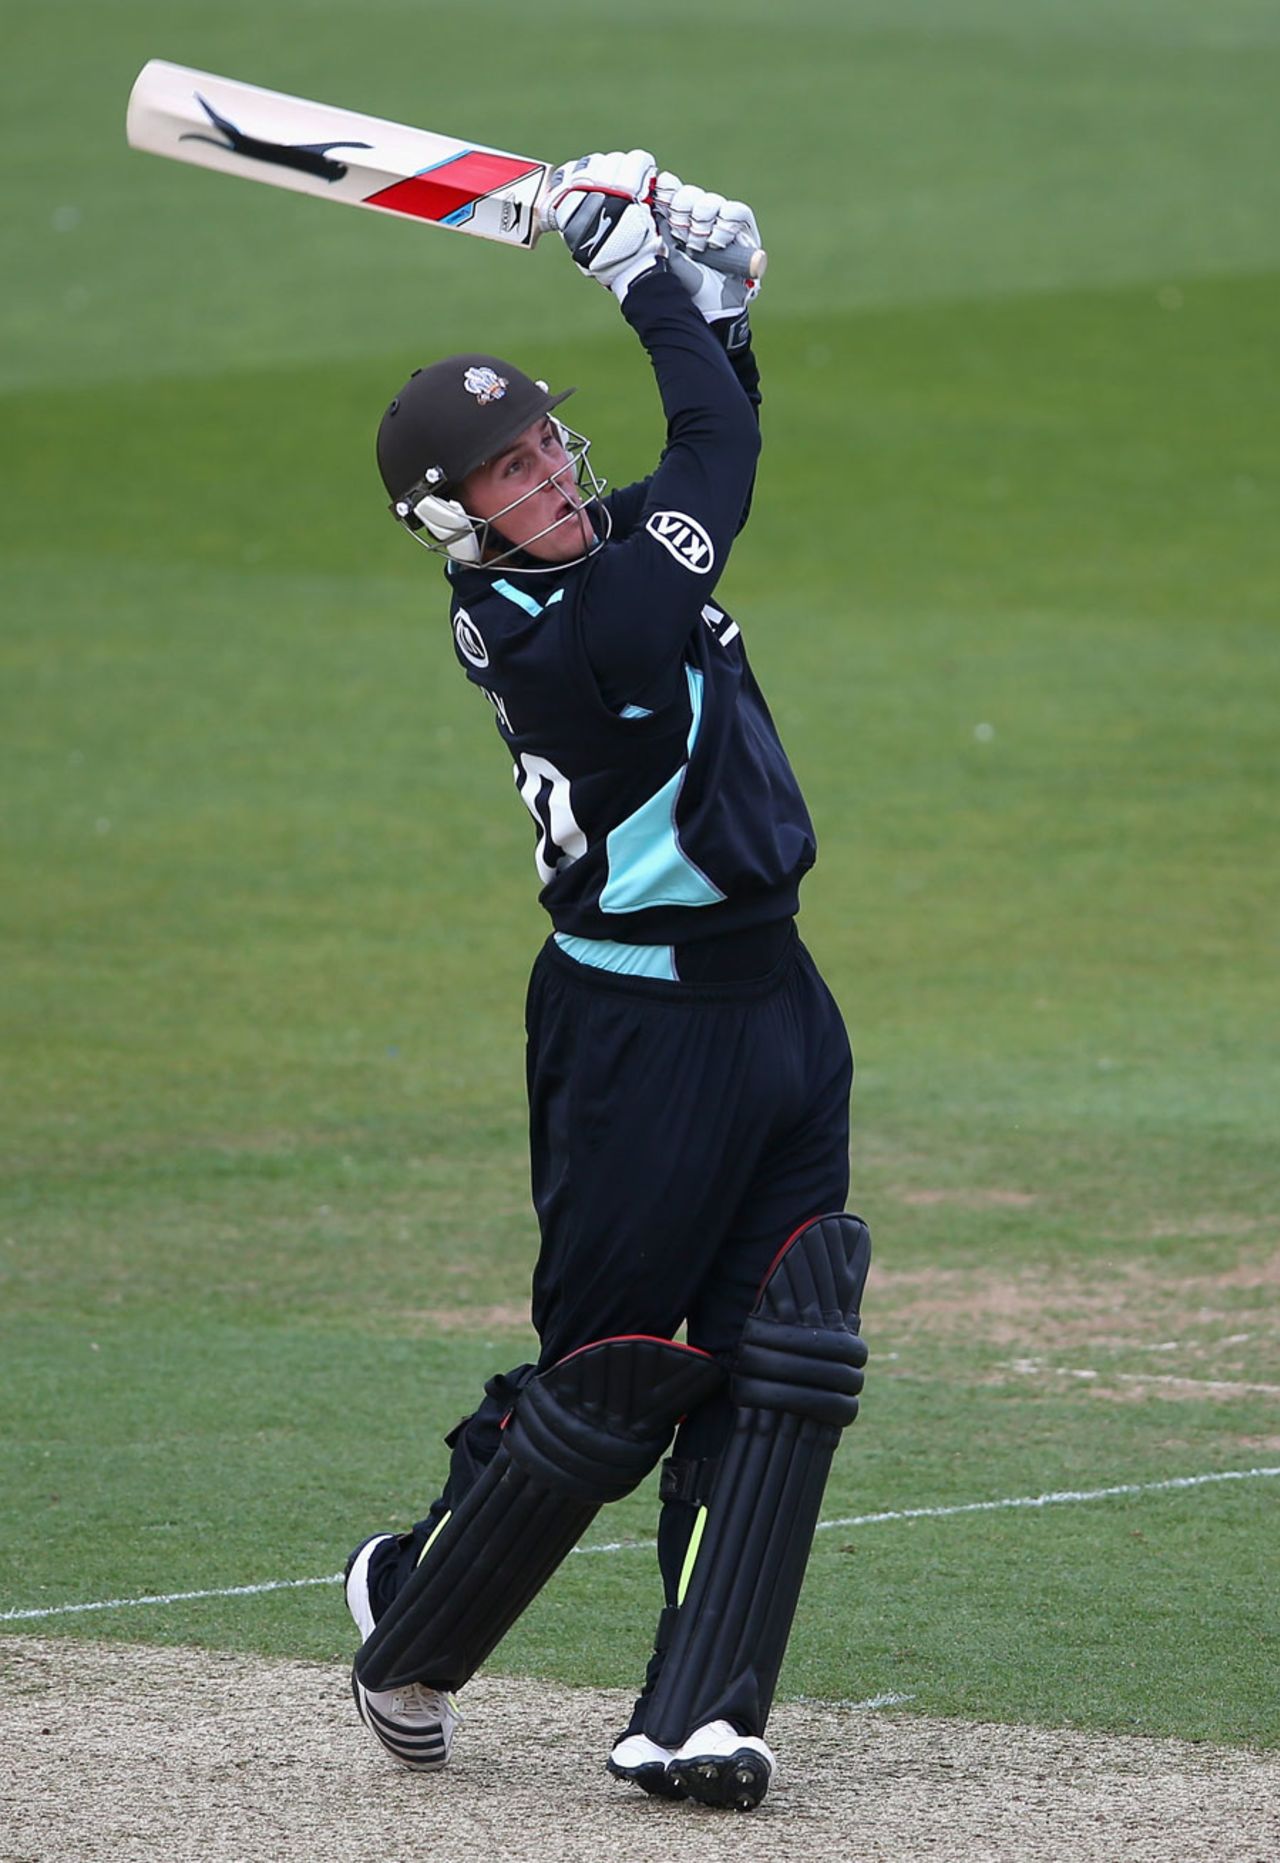 Jason Roy made a century off 101 balls, Surrey v Durham, Yorkshire Bank 40, The Oval, May 9, 2013